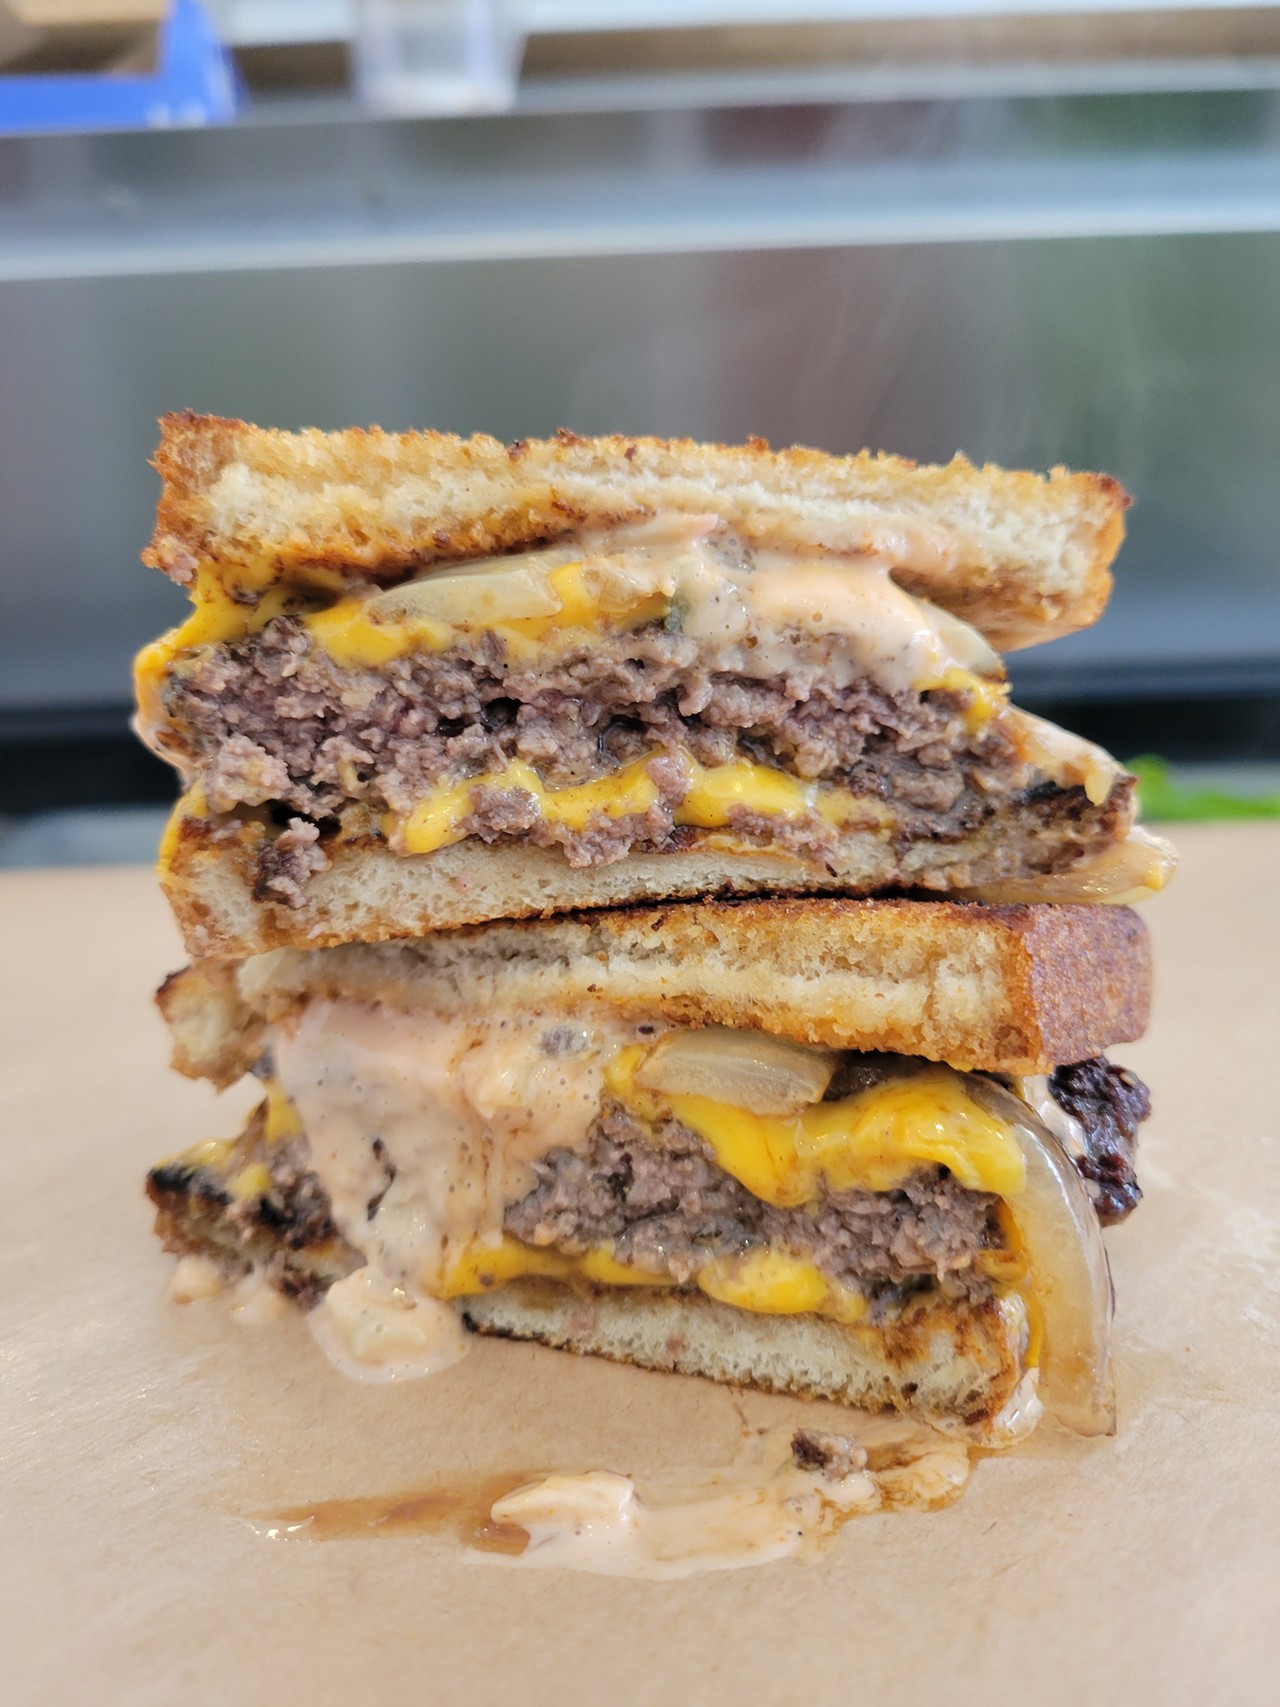 Delicatexan
3710 Broadway St
Patty Melt $11.50Beef Patty, Sautéed Onions, American Cheese, & Thousand
Island Dressing on Sourdough. Plus a bag of chips.